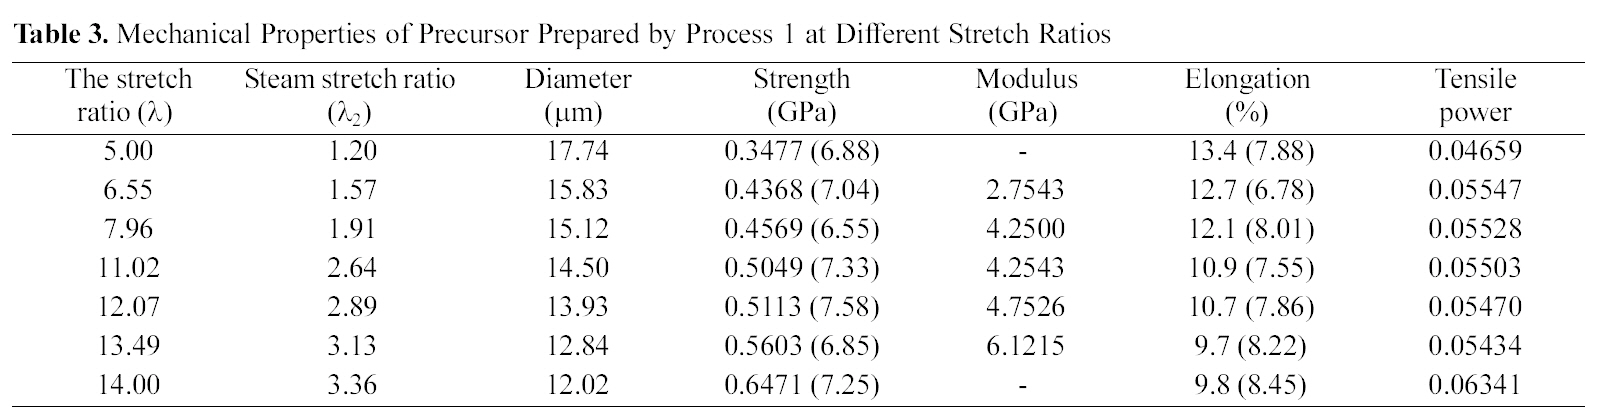 Mechanical Properties of Precursor Prepared by Process 1 at Different Stretch Ratios